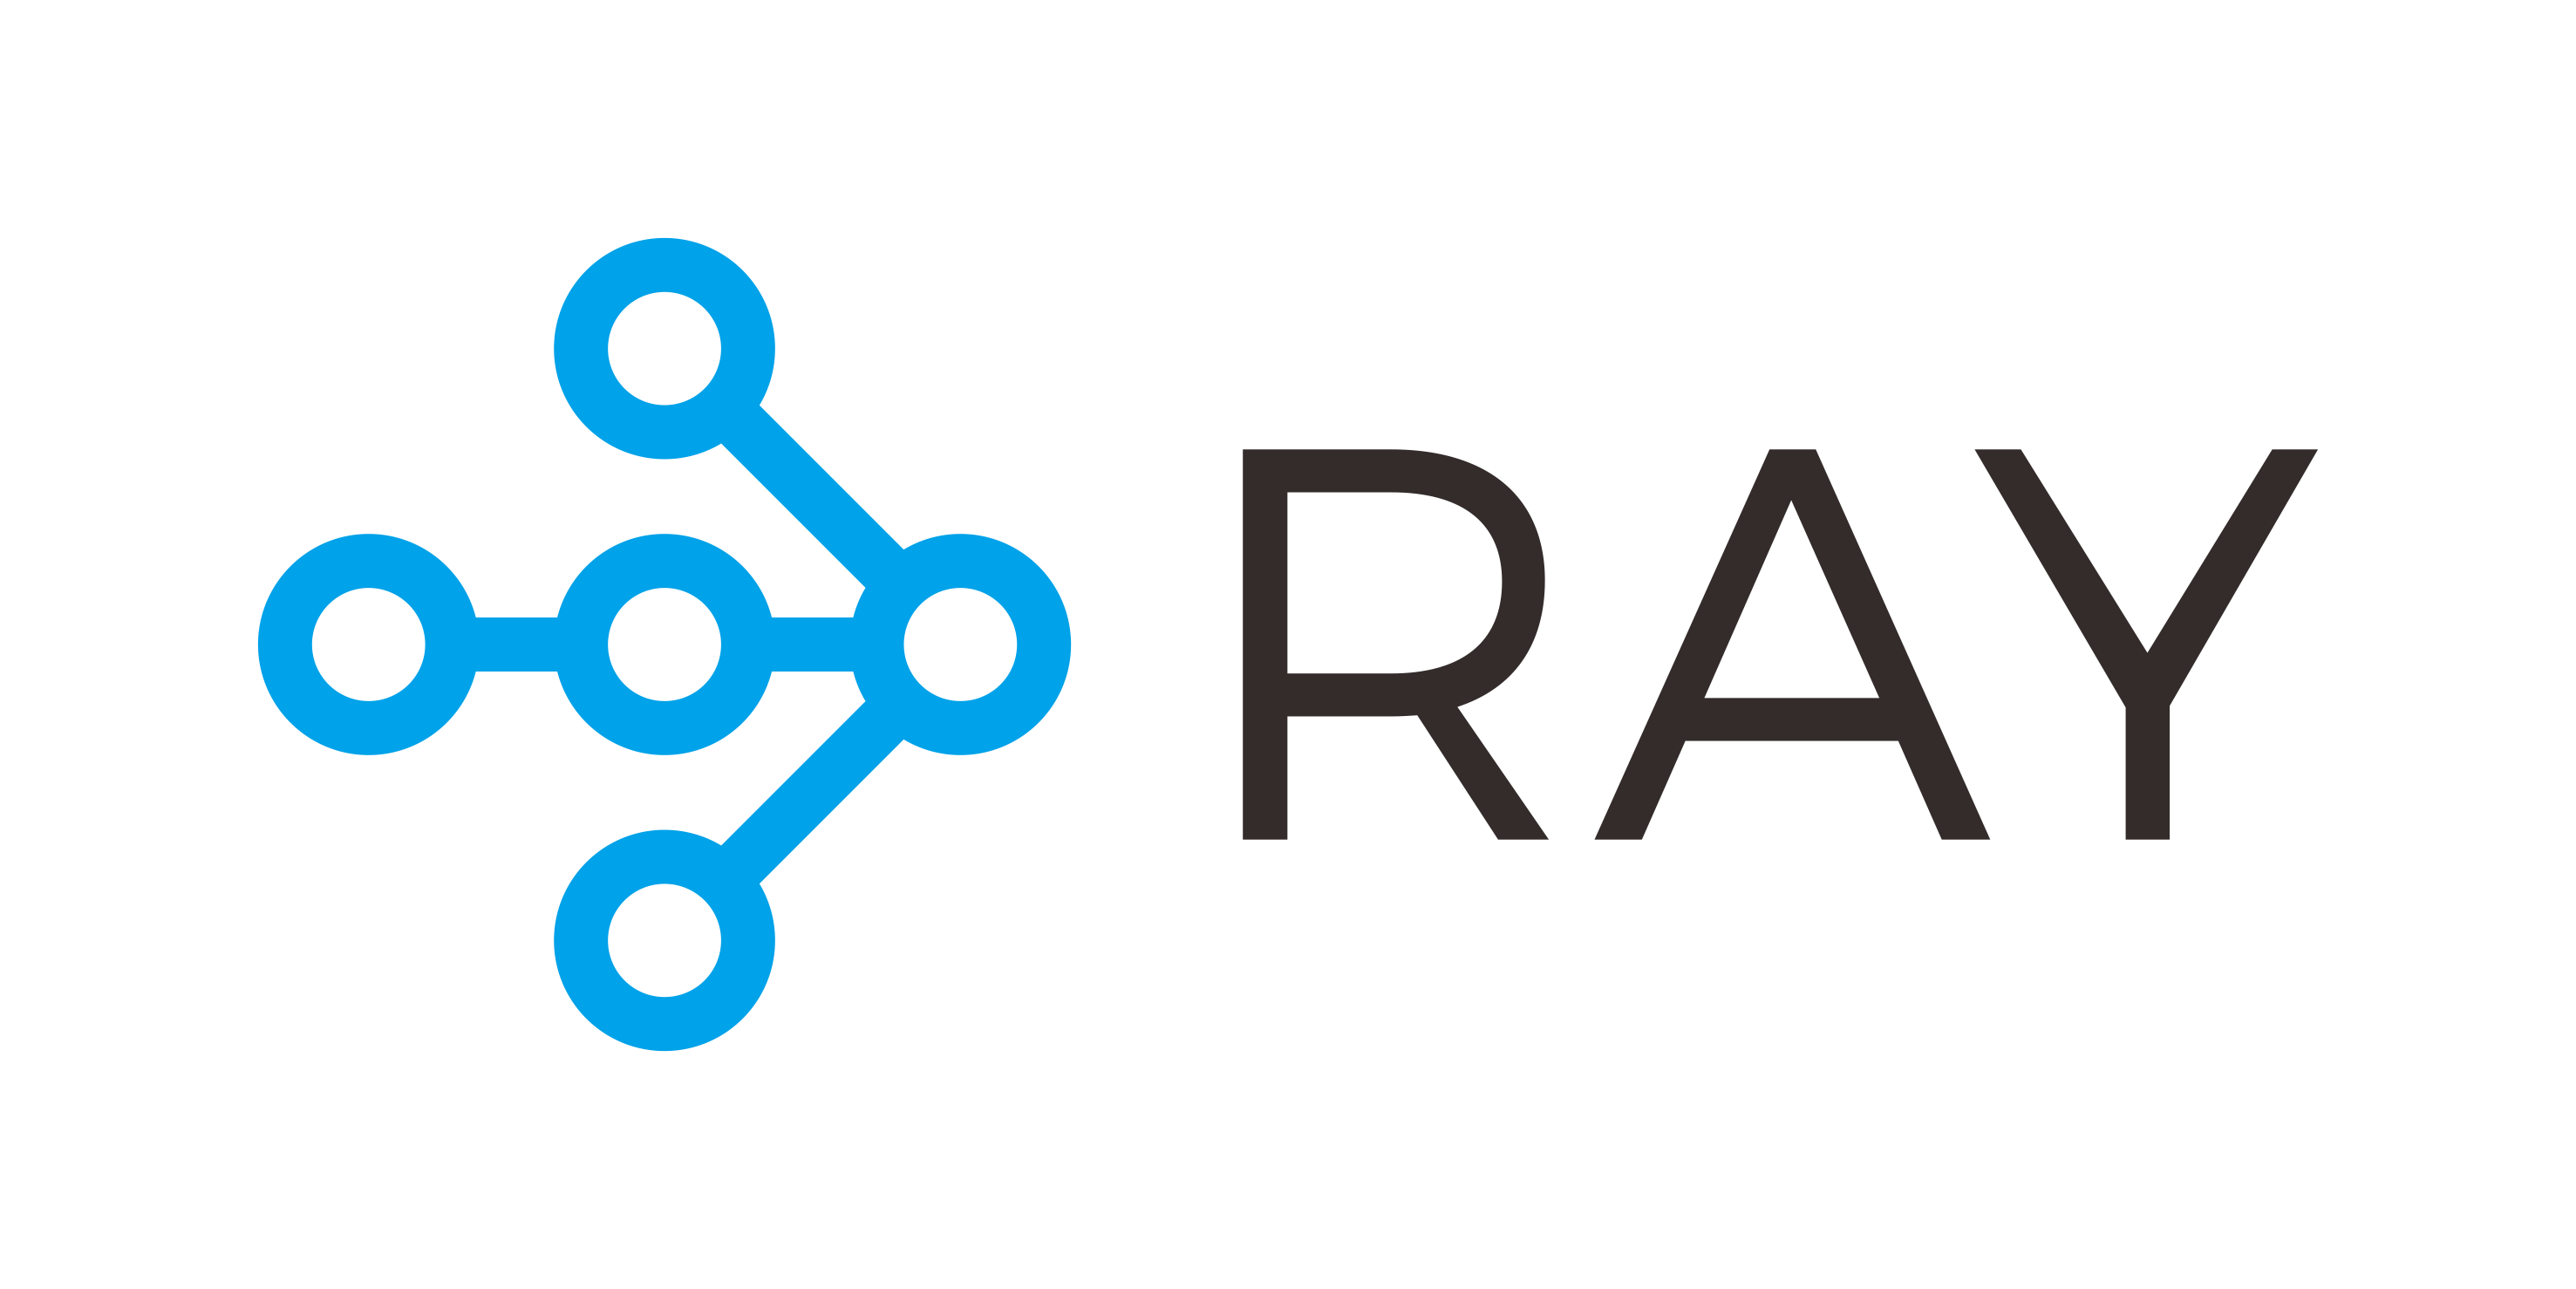 https://github.com/ray-project/ray/raw/master/doc/source/images/ray_logo.png